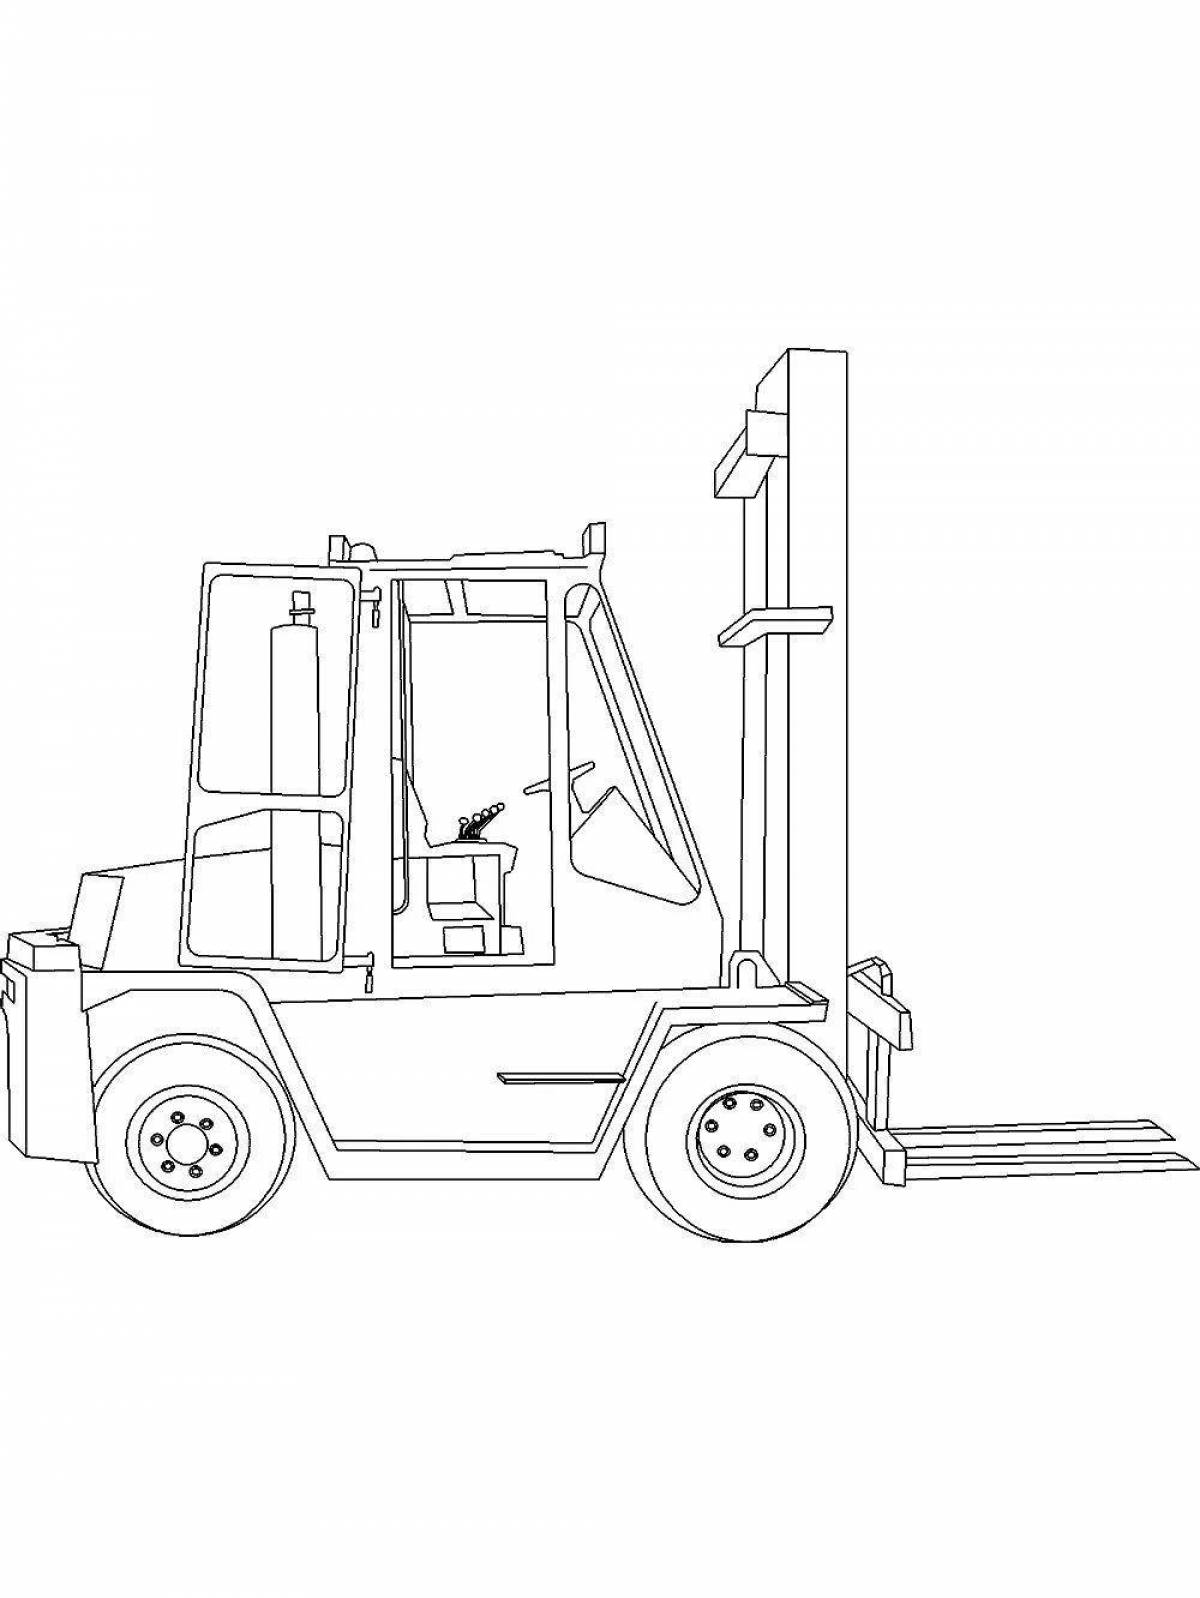 Colouring awesome forklift